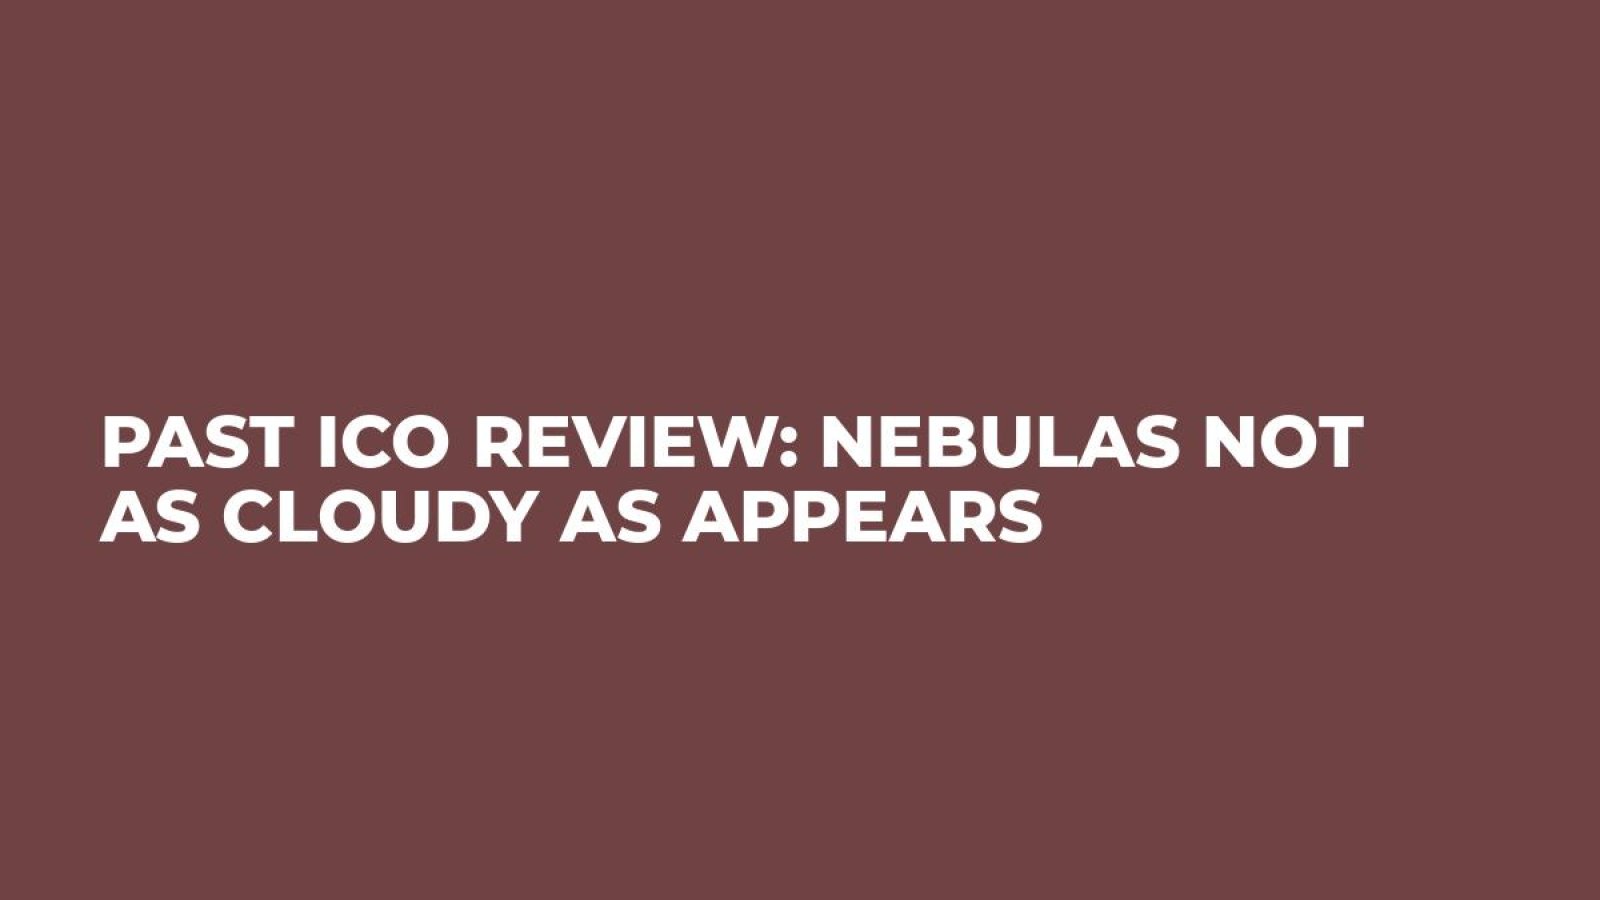 Past ICO Review: Nebulas Not as Cloudy as Appears